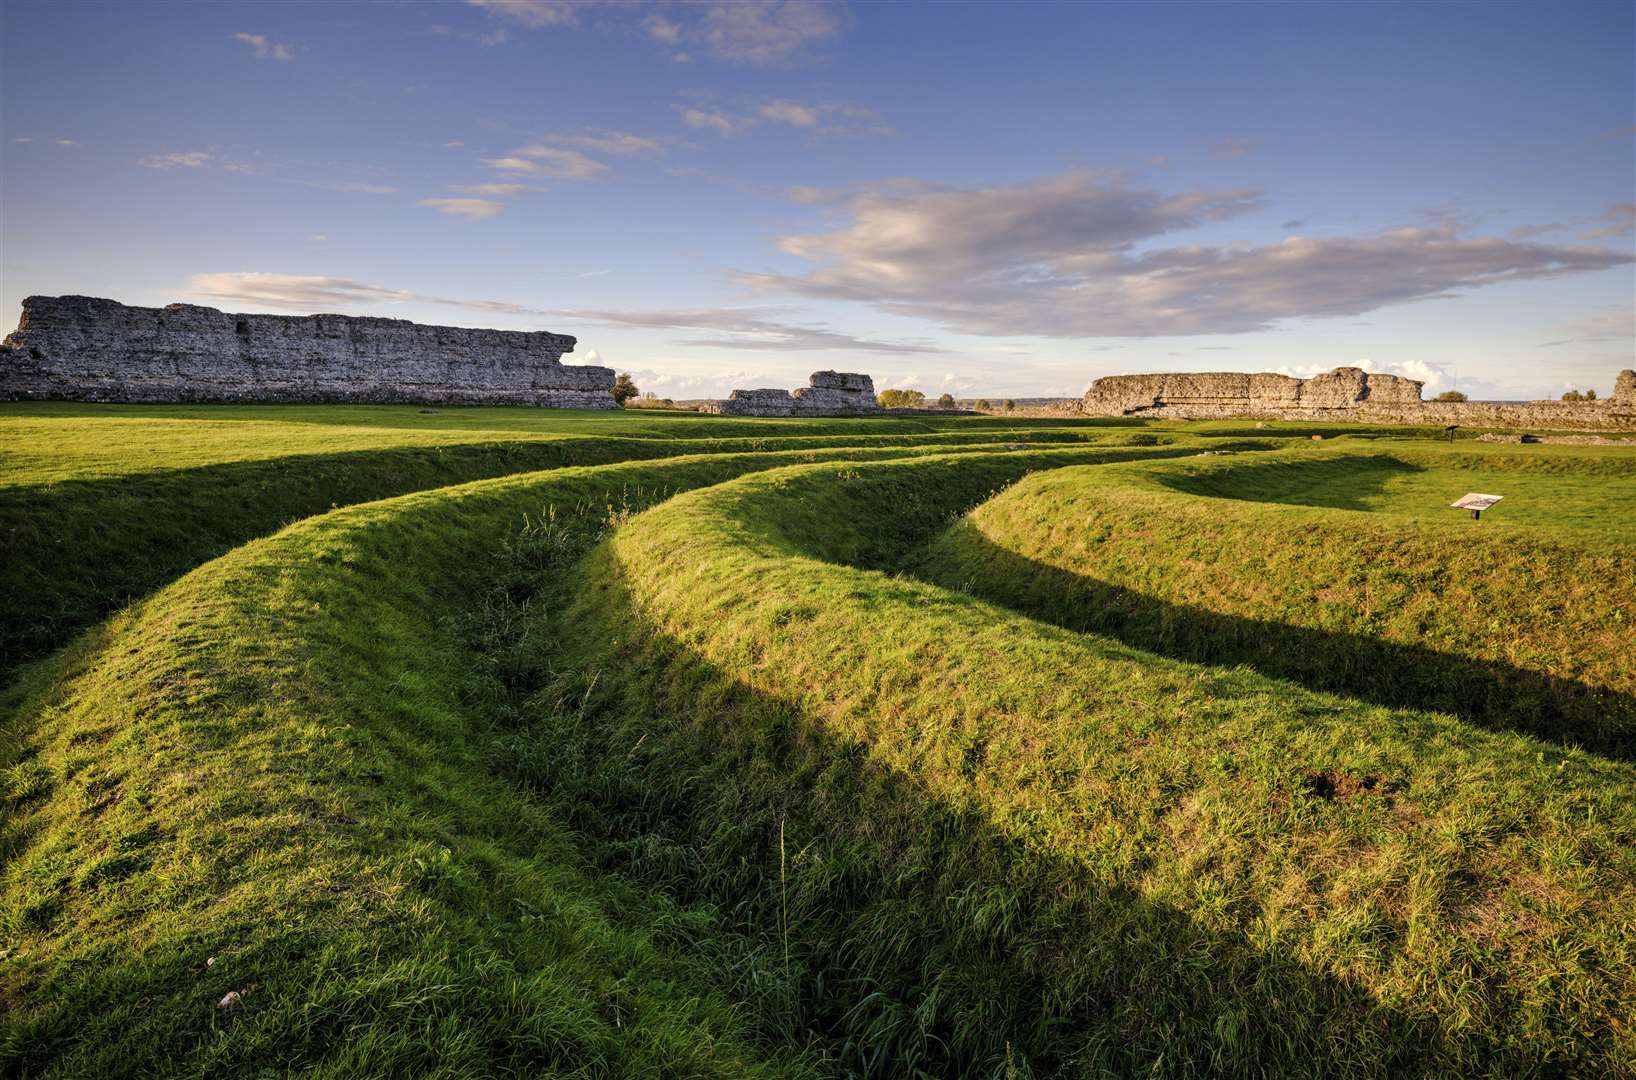 The remains of the Roman fort at Richborough